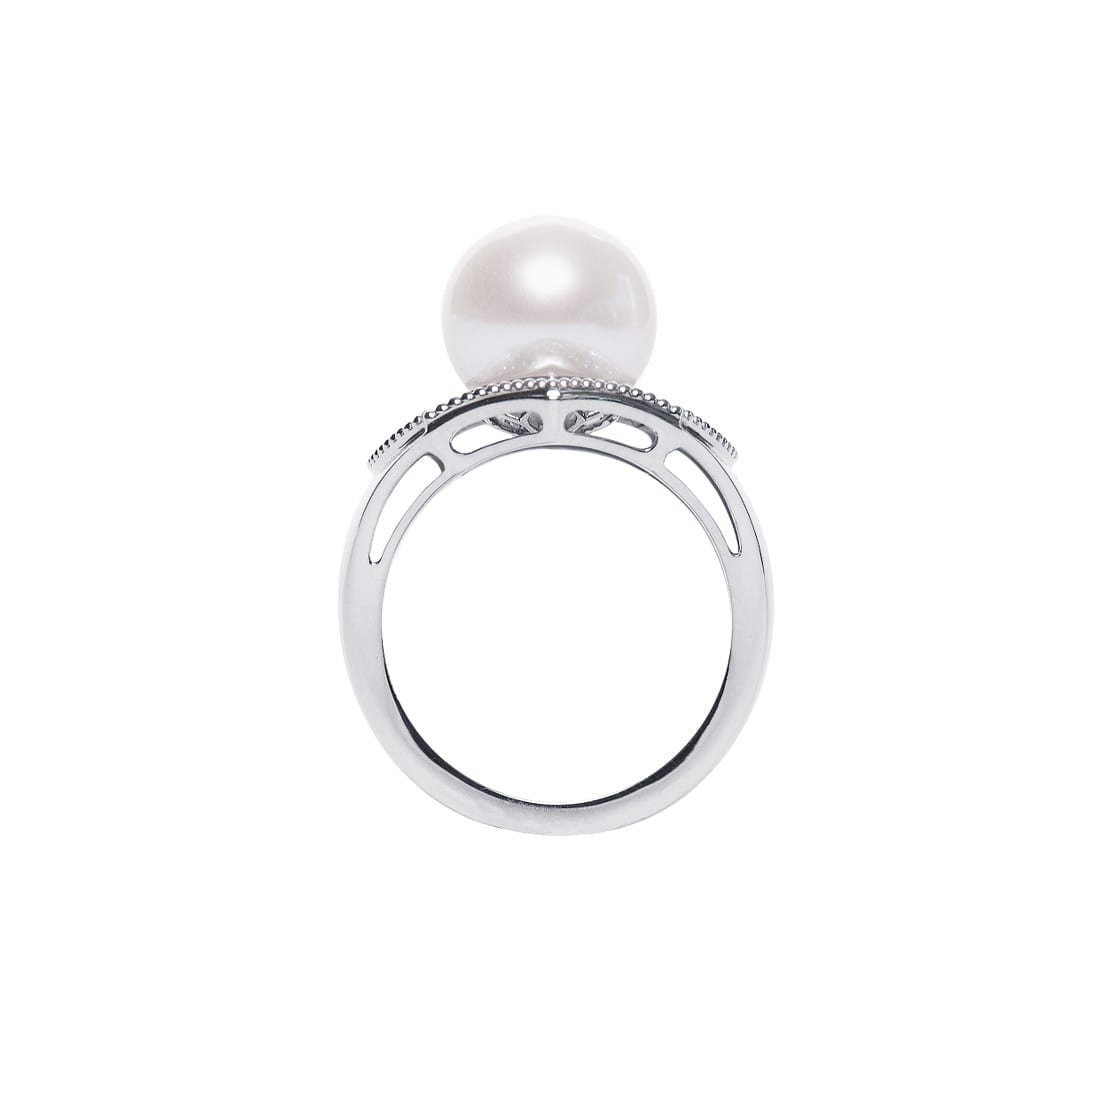 Mauresque Pearl and Black Diamond Ring in White Gold (side view)